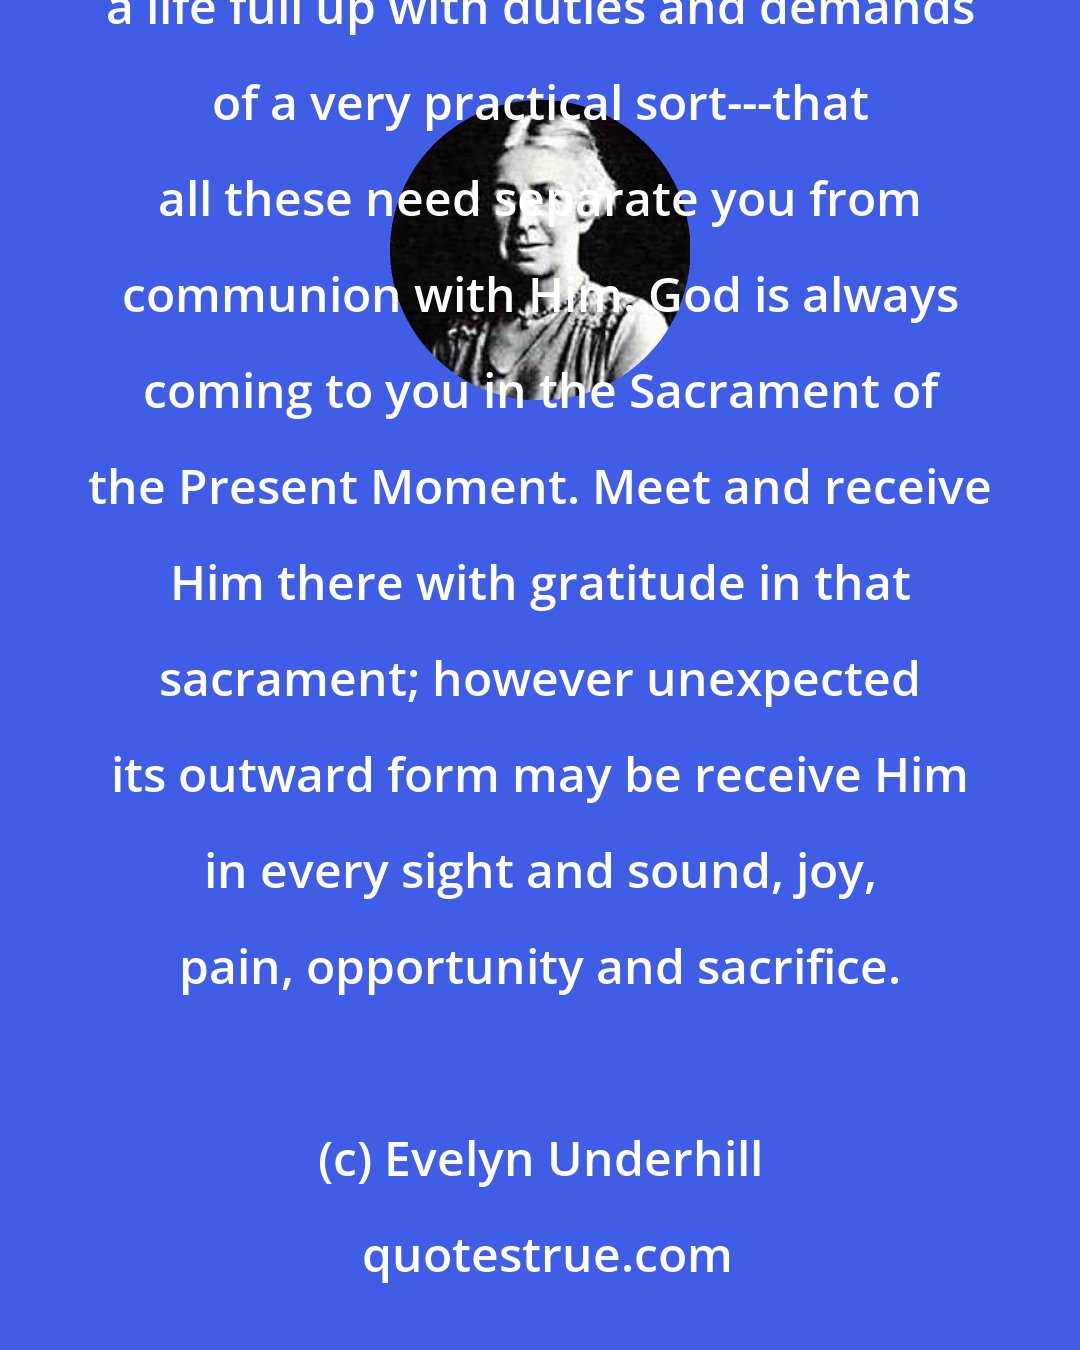 Evelyn Underhill: Never let yourself think that because God has given you many things to do for Himpressing routine jobs, a life full up with duties and demands of a very practical sort---that all these need separate you from communion with Him. God is always coming to you in the Sacrament of the Present Moment. Meet and receive Him there with gratitude in that sacrament; however unexpected its outward form may be receive Him in every sight and sound, joy, pain, opportunity and sacrifice.